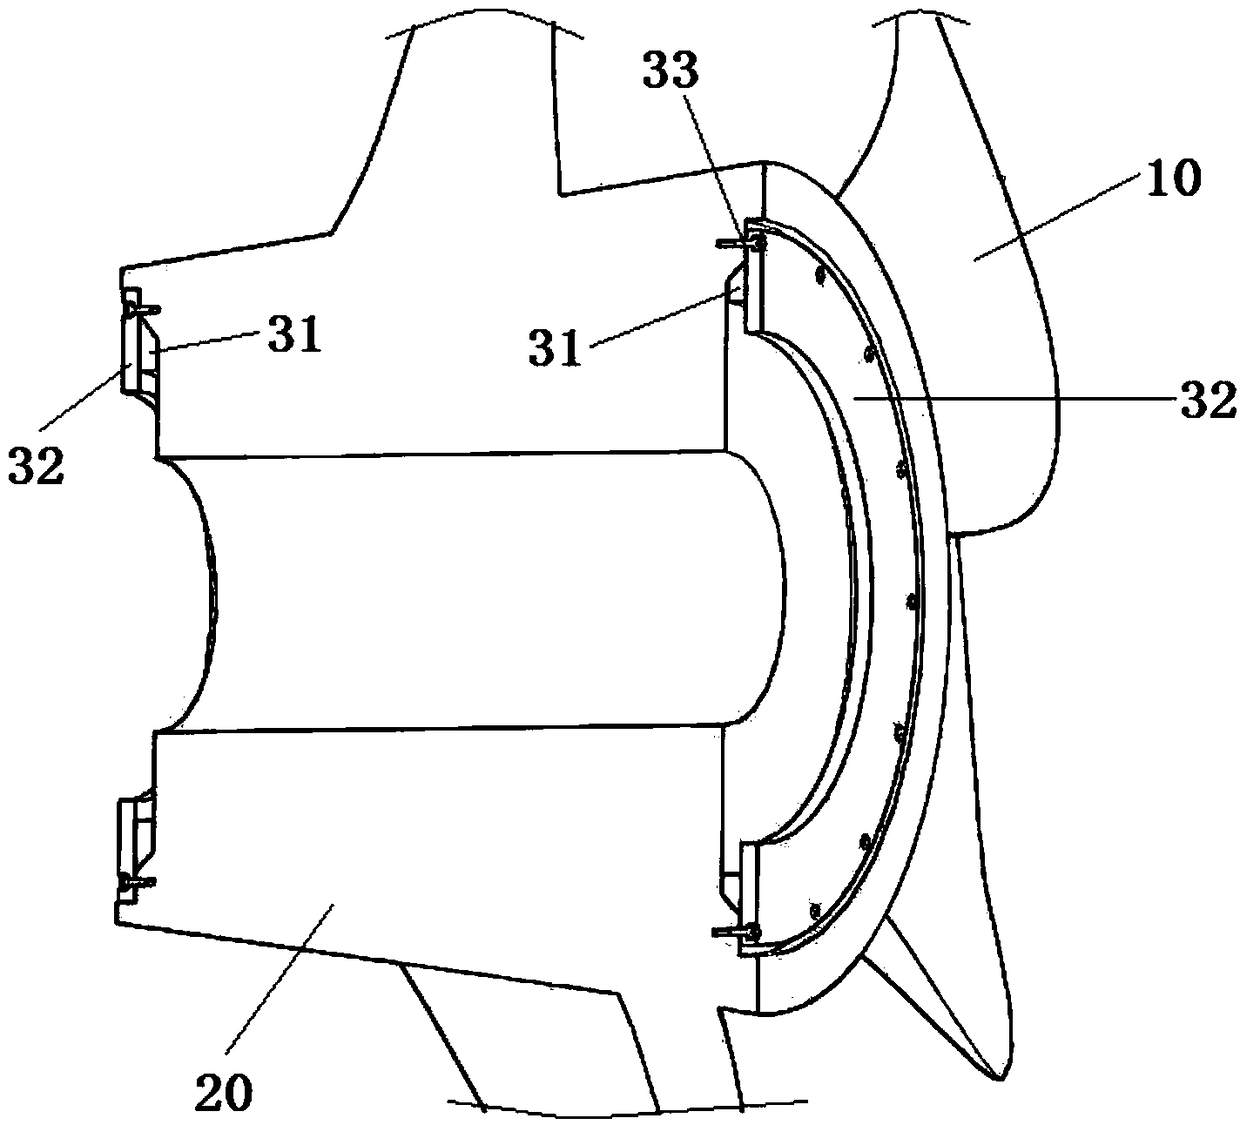 Ship propeller excitation force friction reduction device